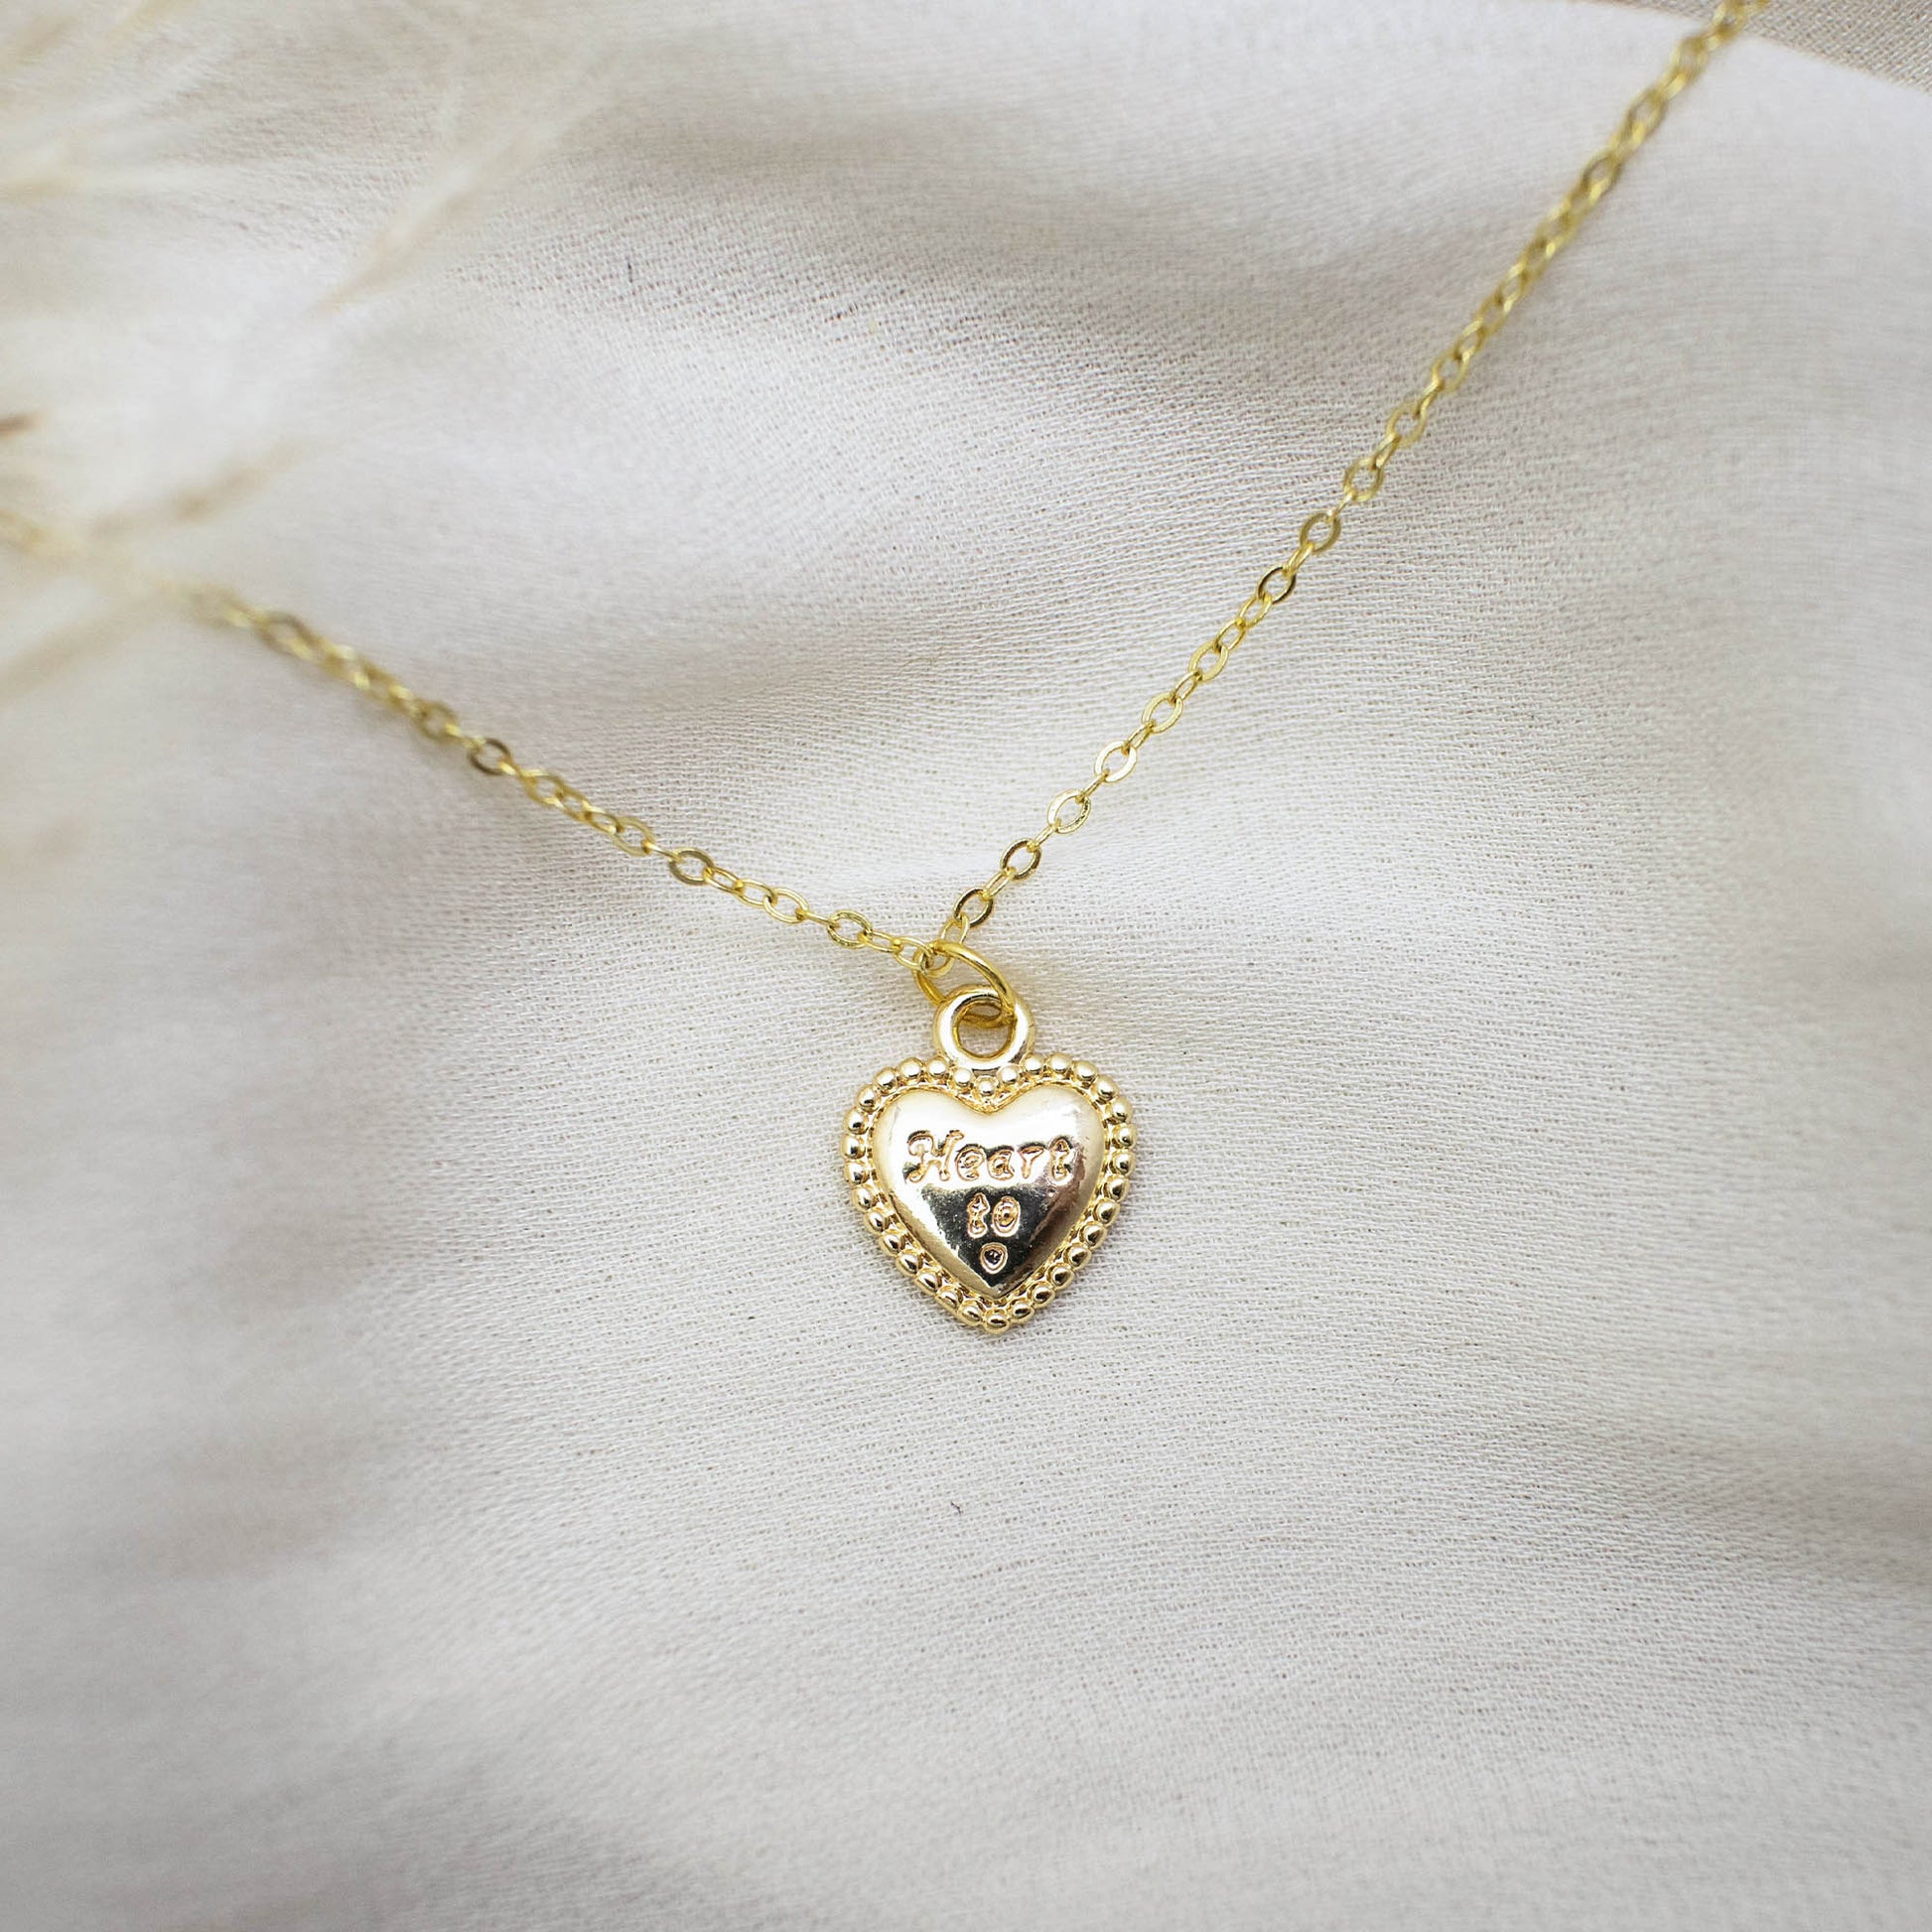 A Necklace made by 14K gold-plated brass, paired with a heart-shaped pendant with the words 'Heart to'.